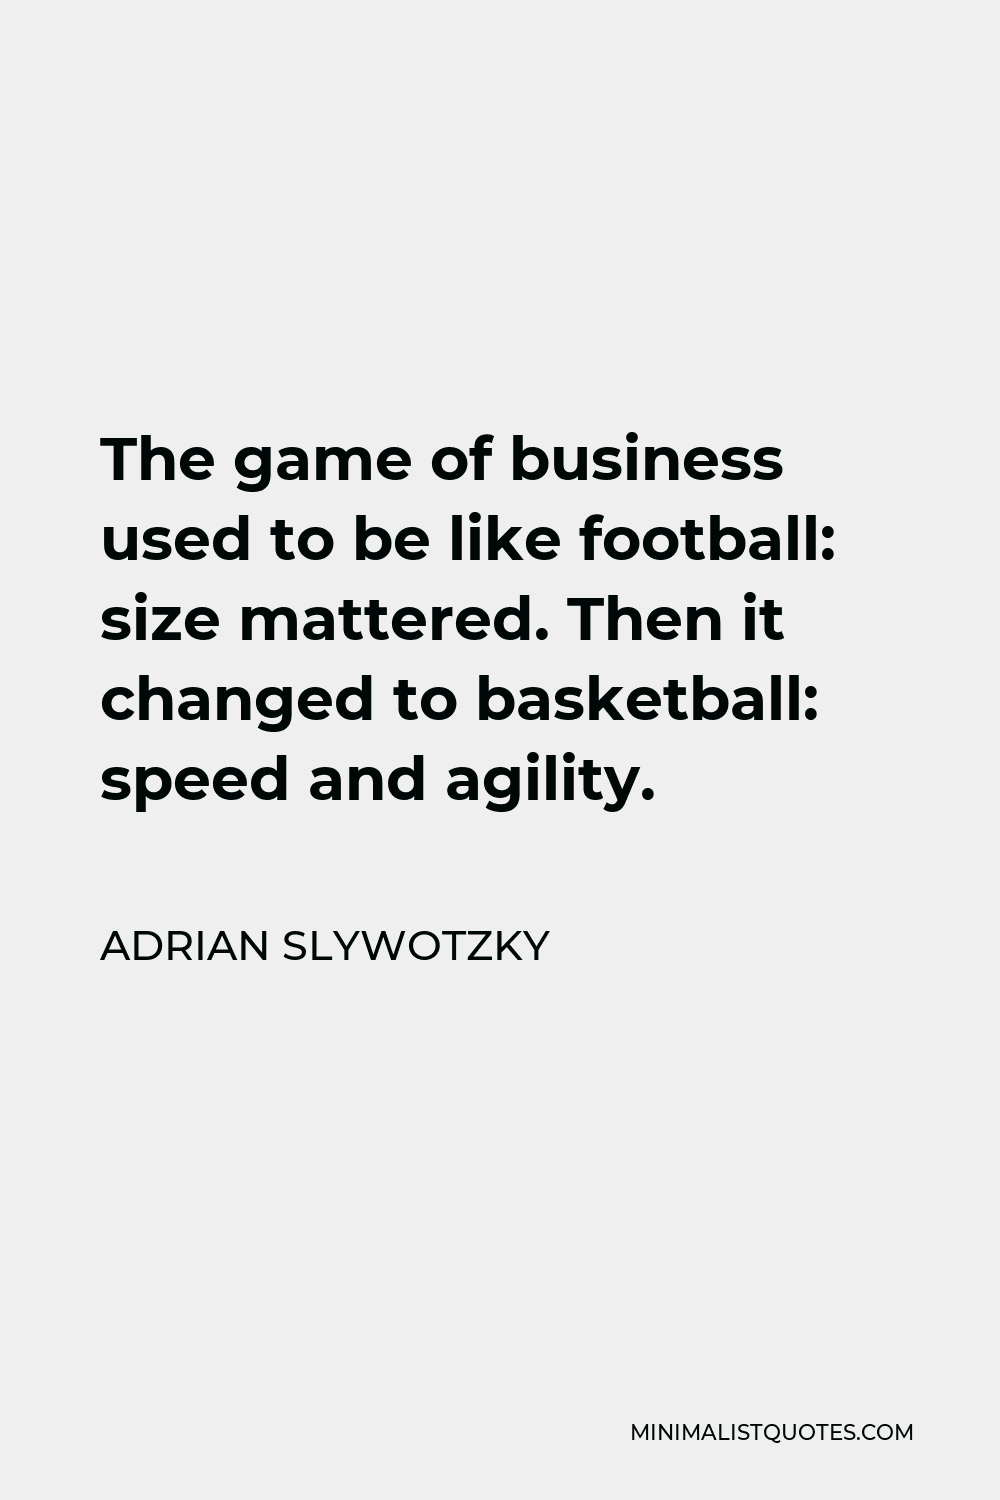 Adrian Slywotzky Quote - The game of business used to be like football: size mattered. Then it changed to basketball: speed and agility.